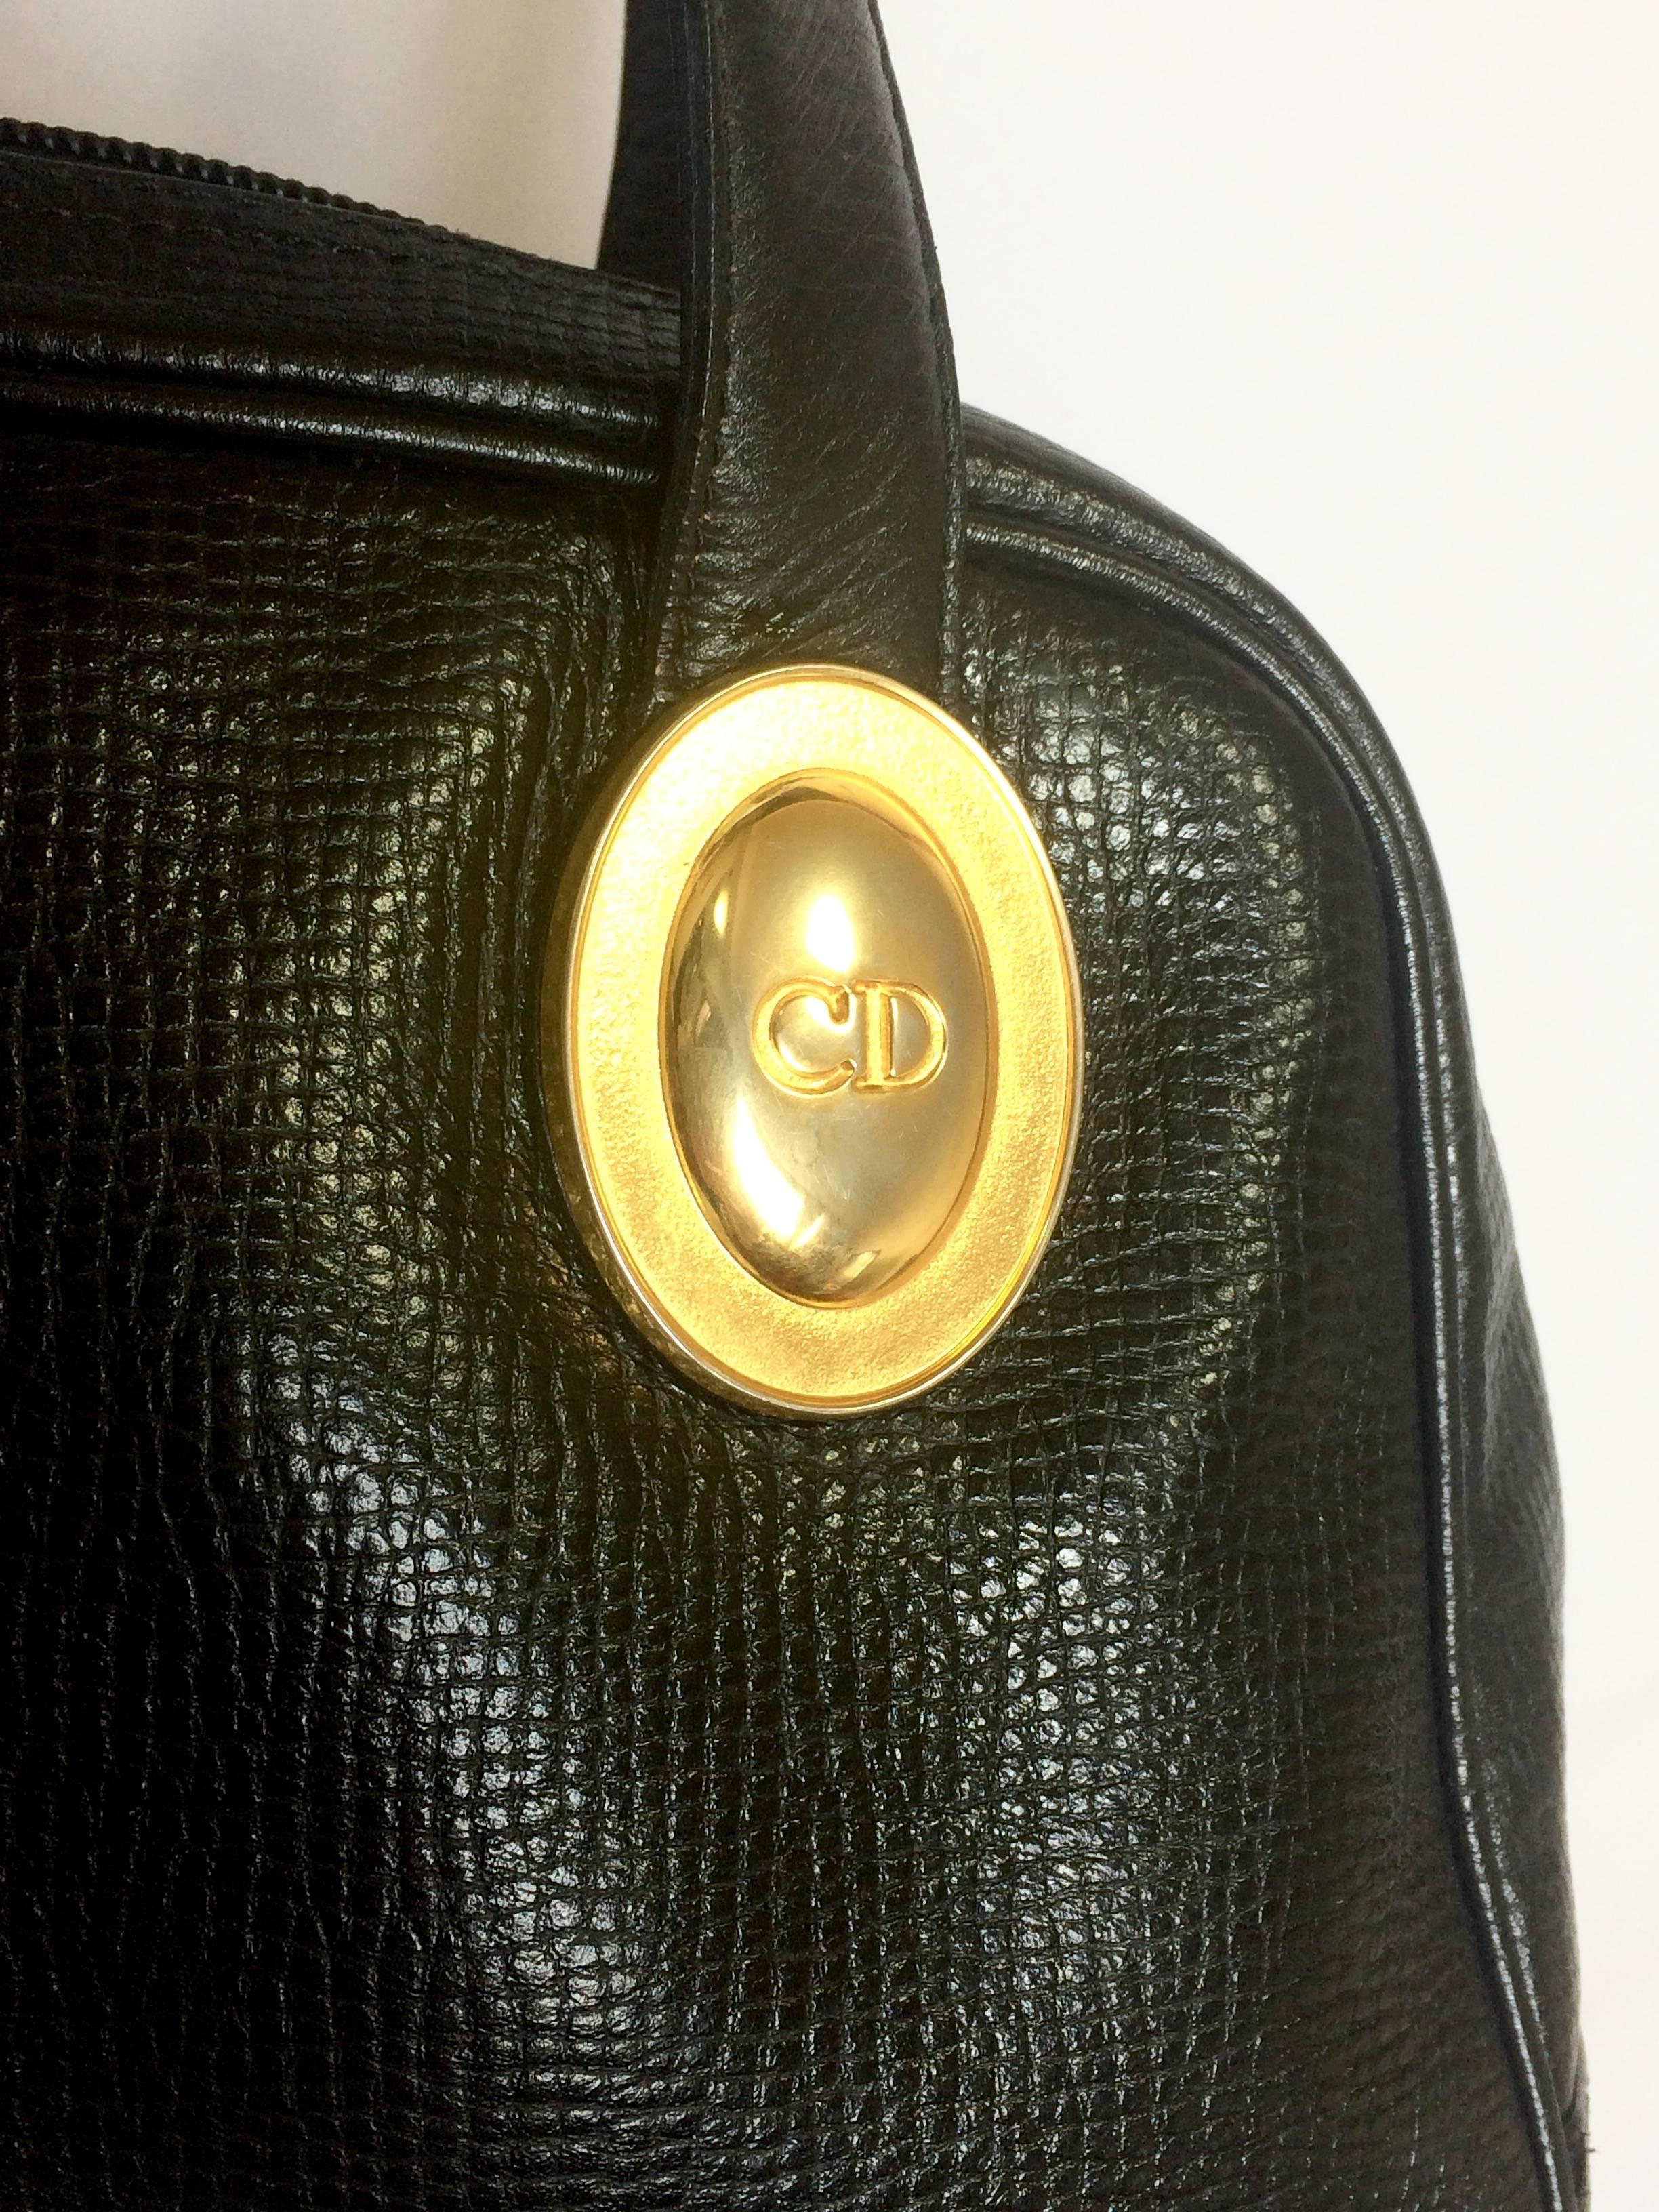 1990s. Vintage Christian Dior black grained leather mini bolide style handbag with oval golden CD logo motif. Classic style bag for daily use.

1990s. Vintage Christian Dior black grained leather mini bolide style handbag with oval golden CD logo